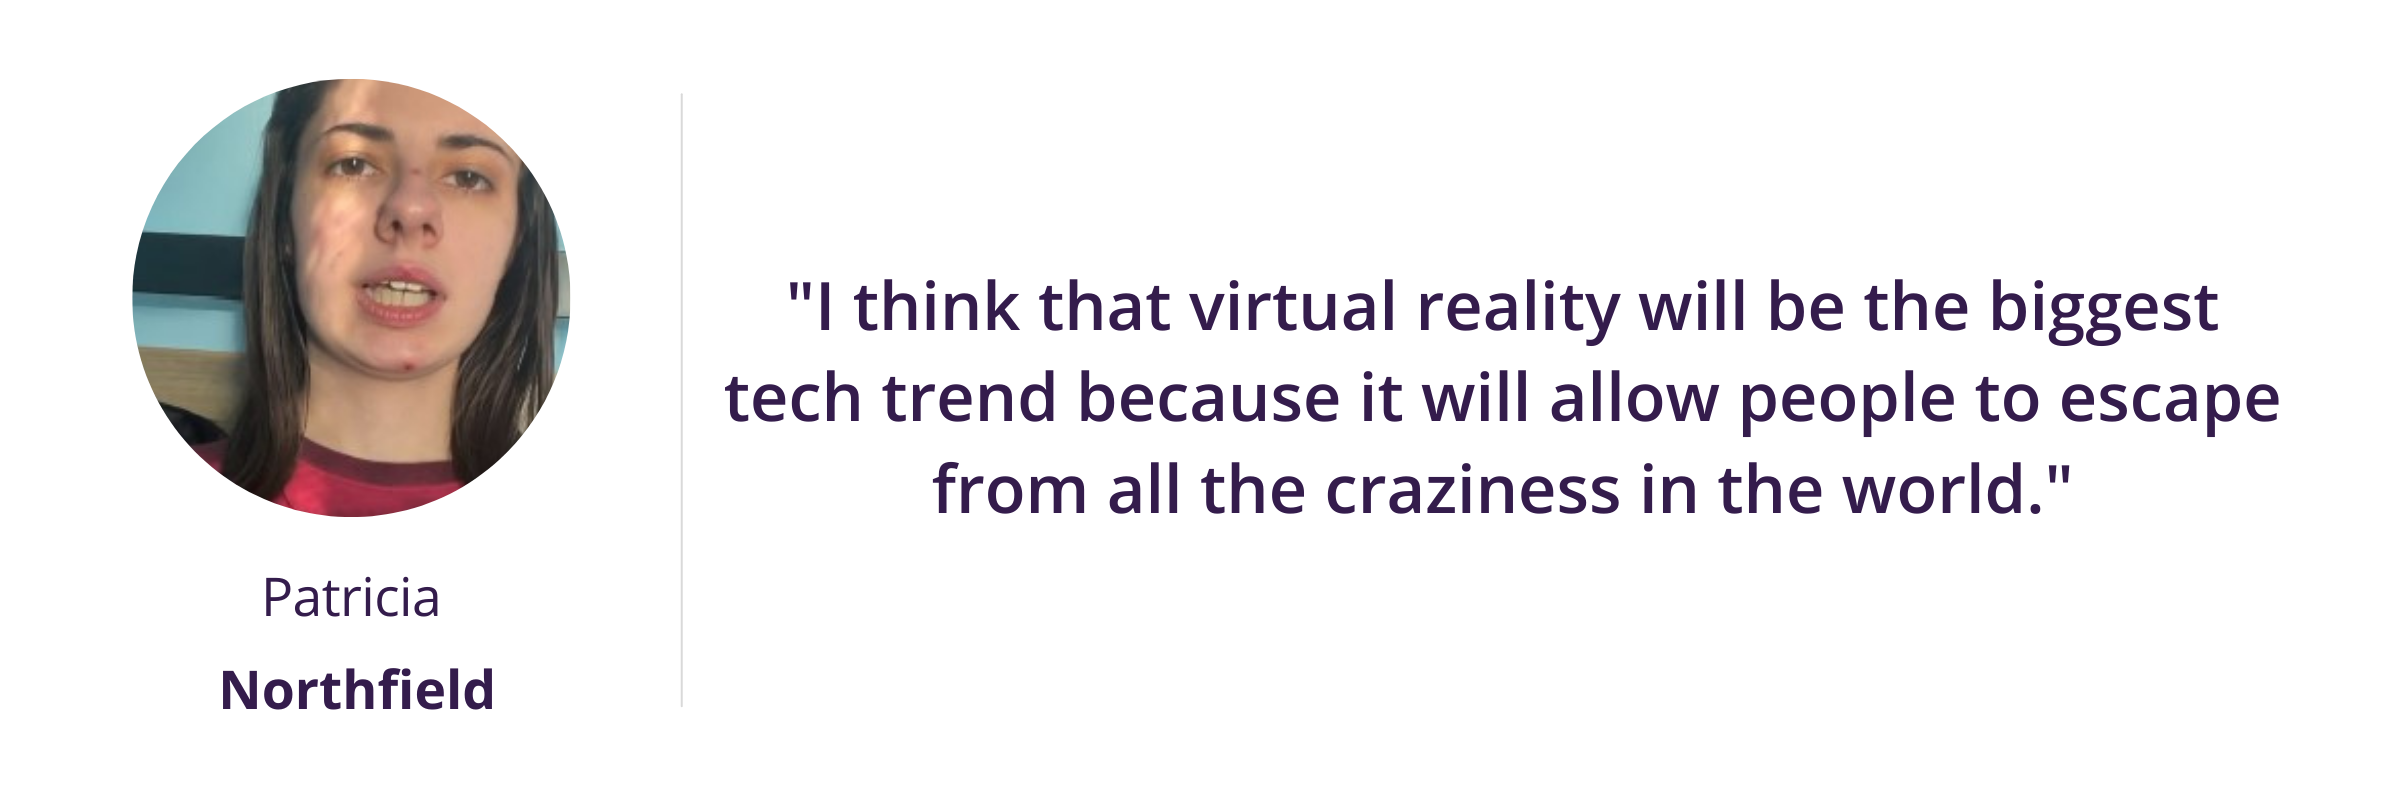 I think that virtual reality will be the biggest tech trend because it will allow people to escape from all the craziness in the world.